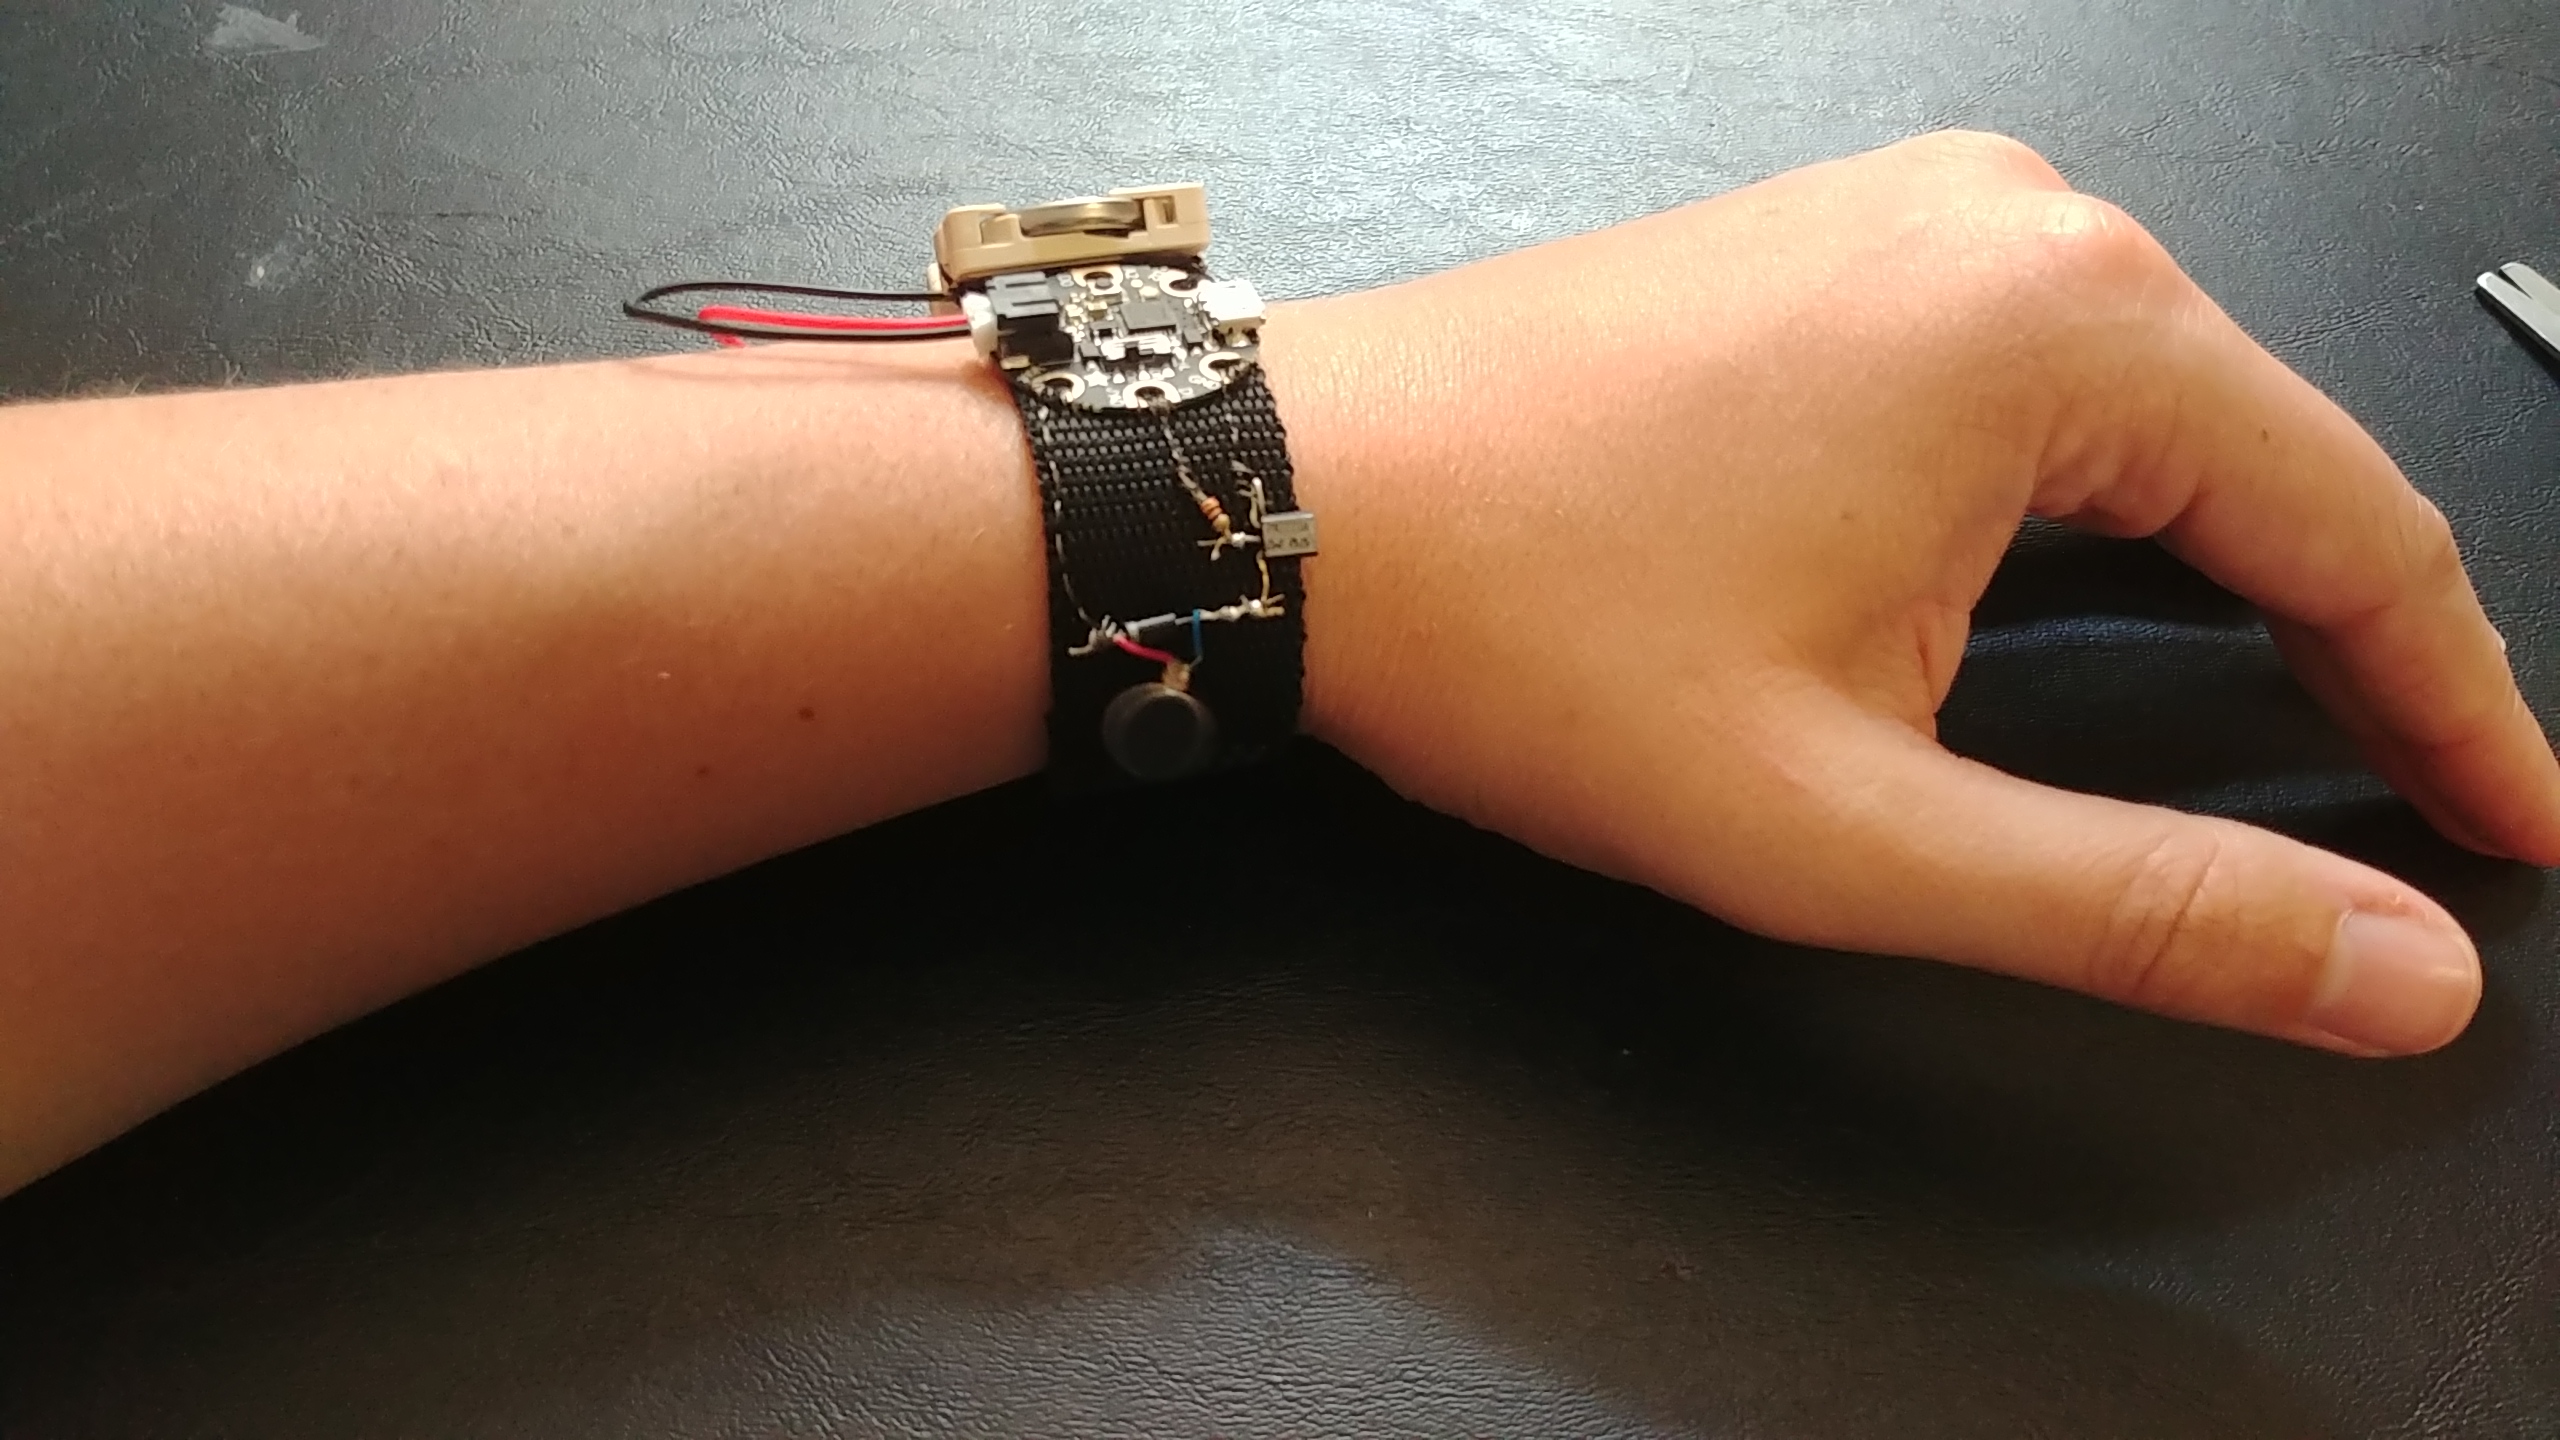 nylon strap is now on my left wrist, you can see the Gemma on the back of my wrist, with the vibration circuit on the inside of my wrist